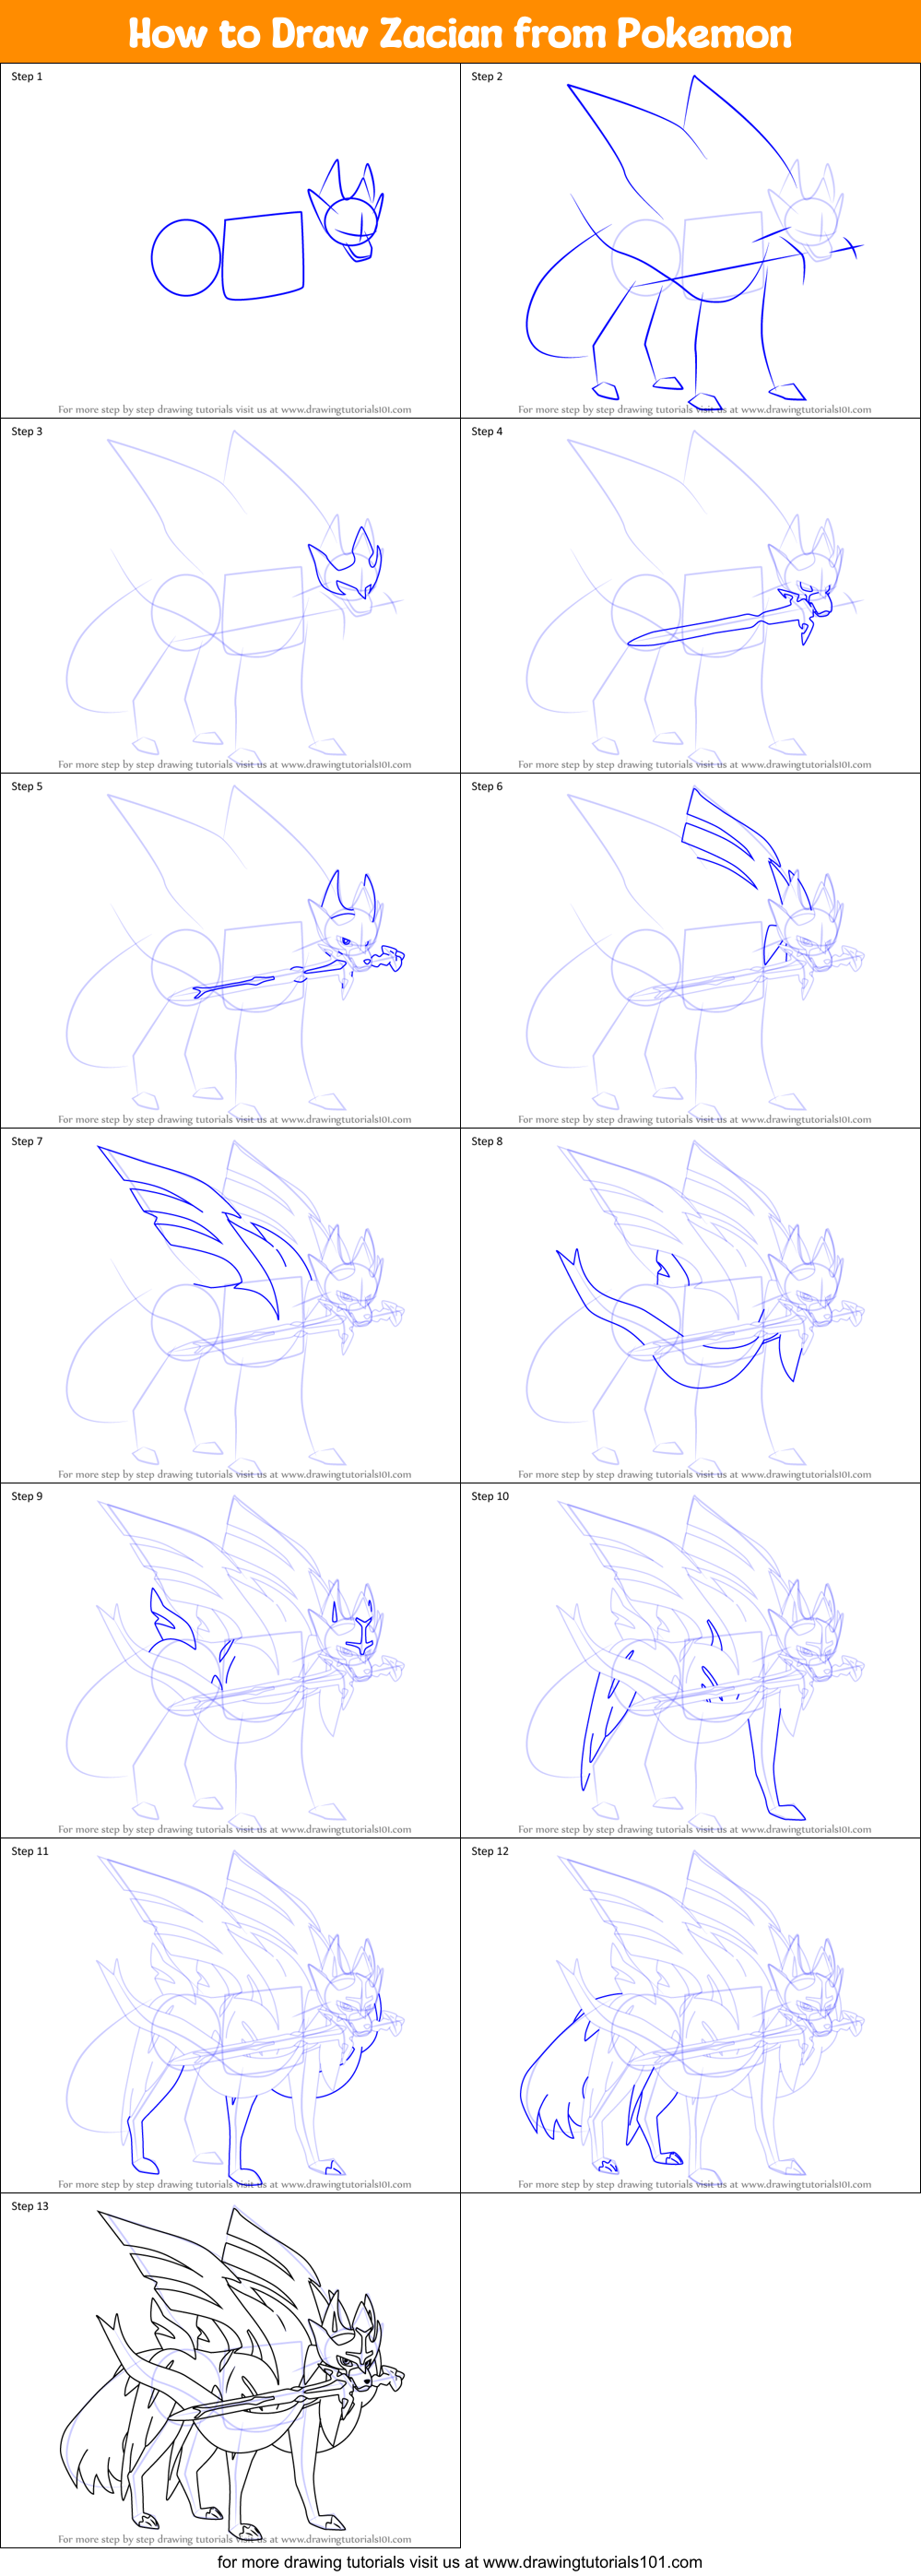 How to Draw Zacian from Pokemon printable step by step drawing sheet